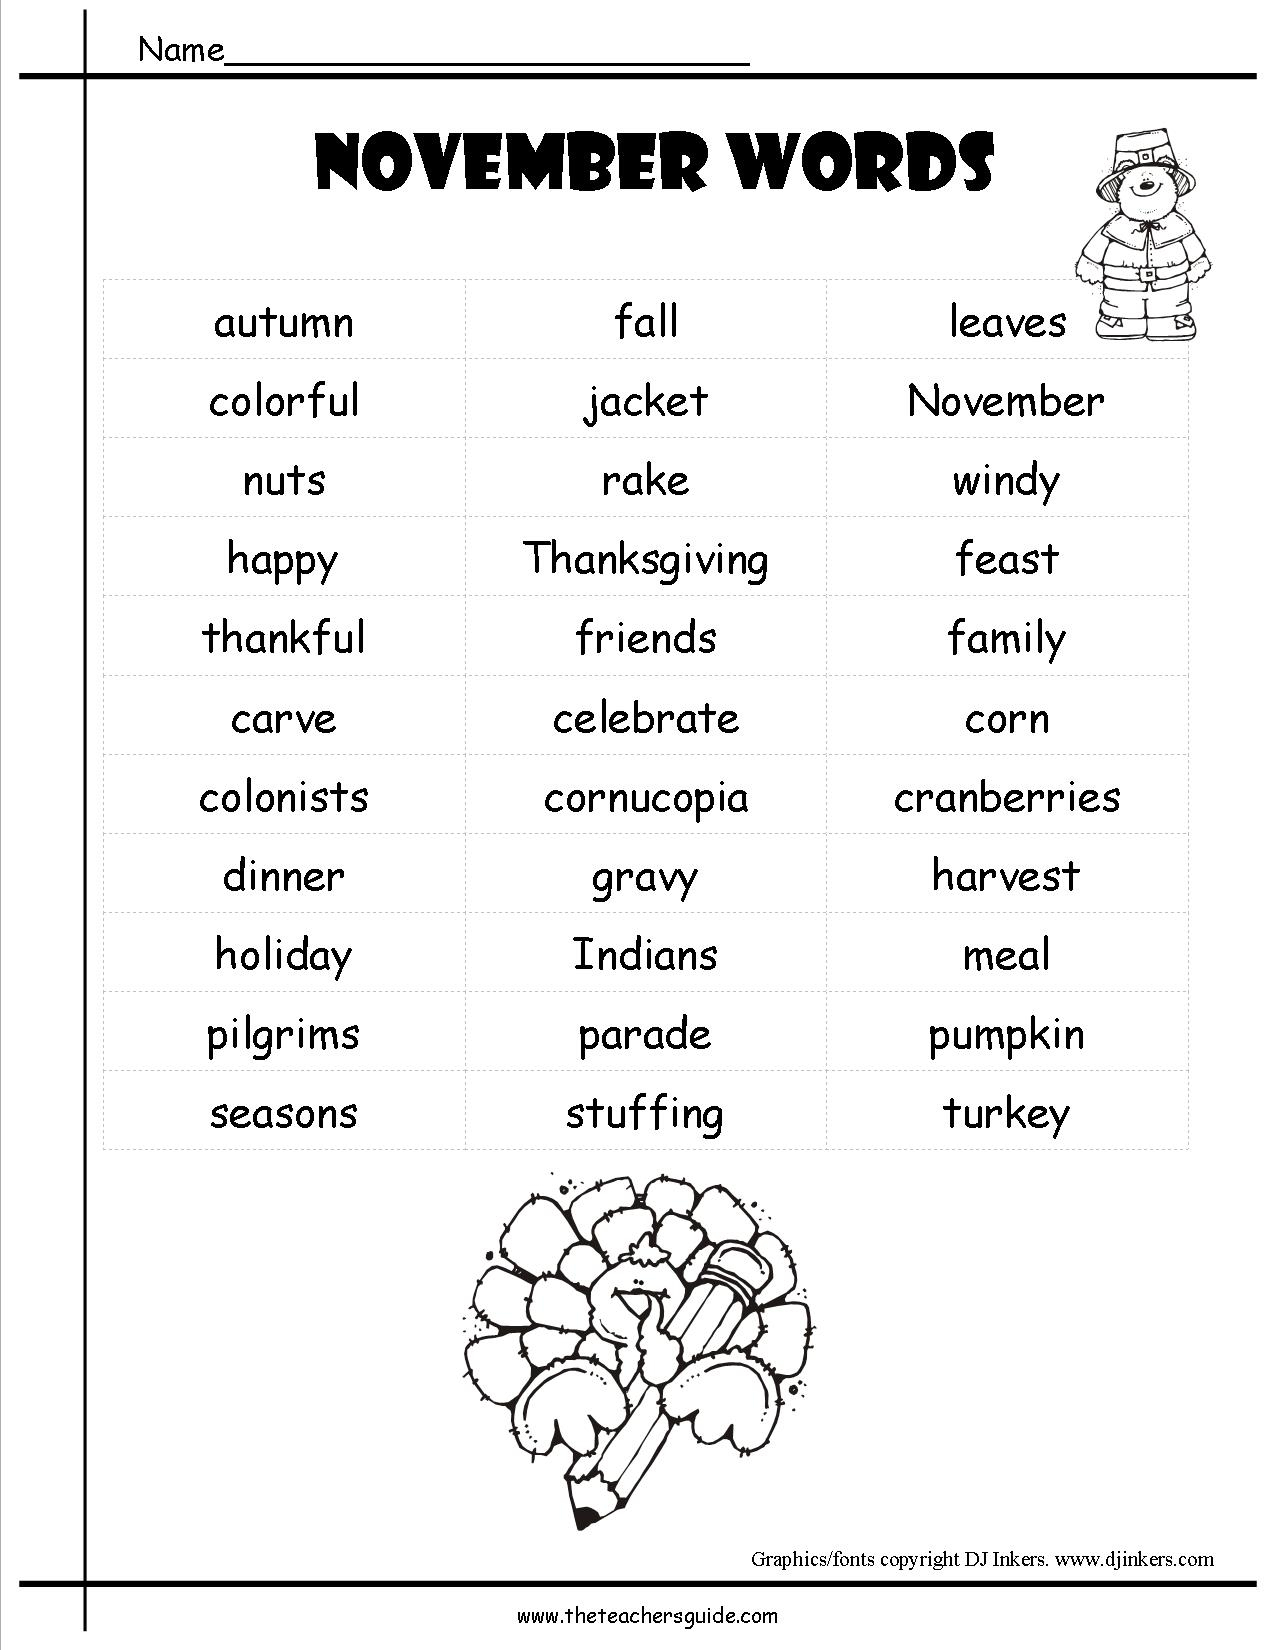 November Lesson Plans, Themes, Printouts, Crafts, And Holidays